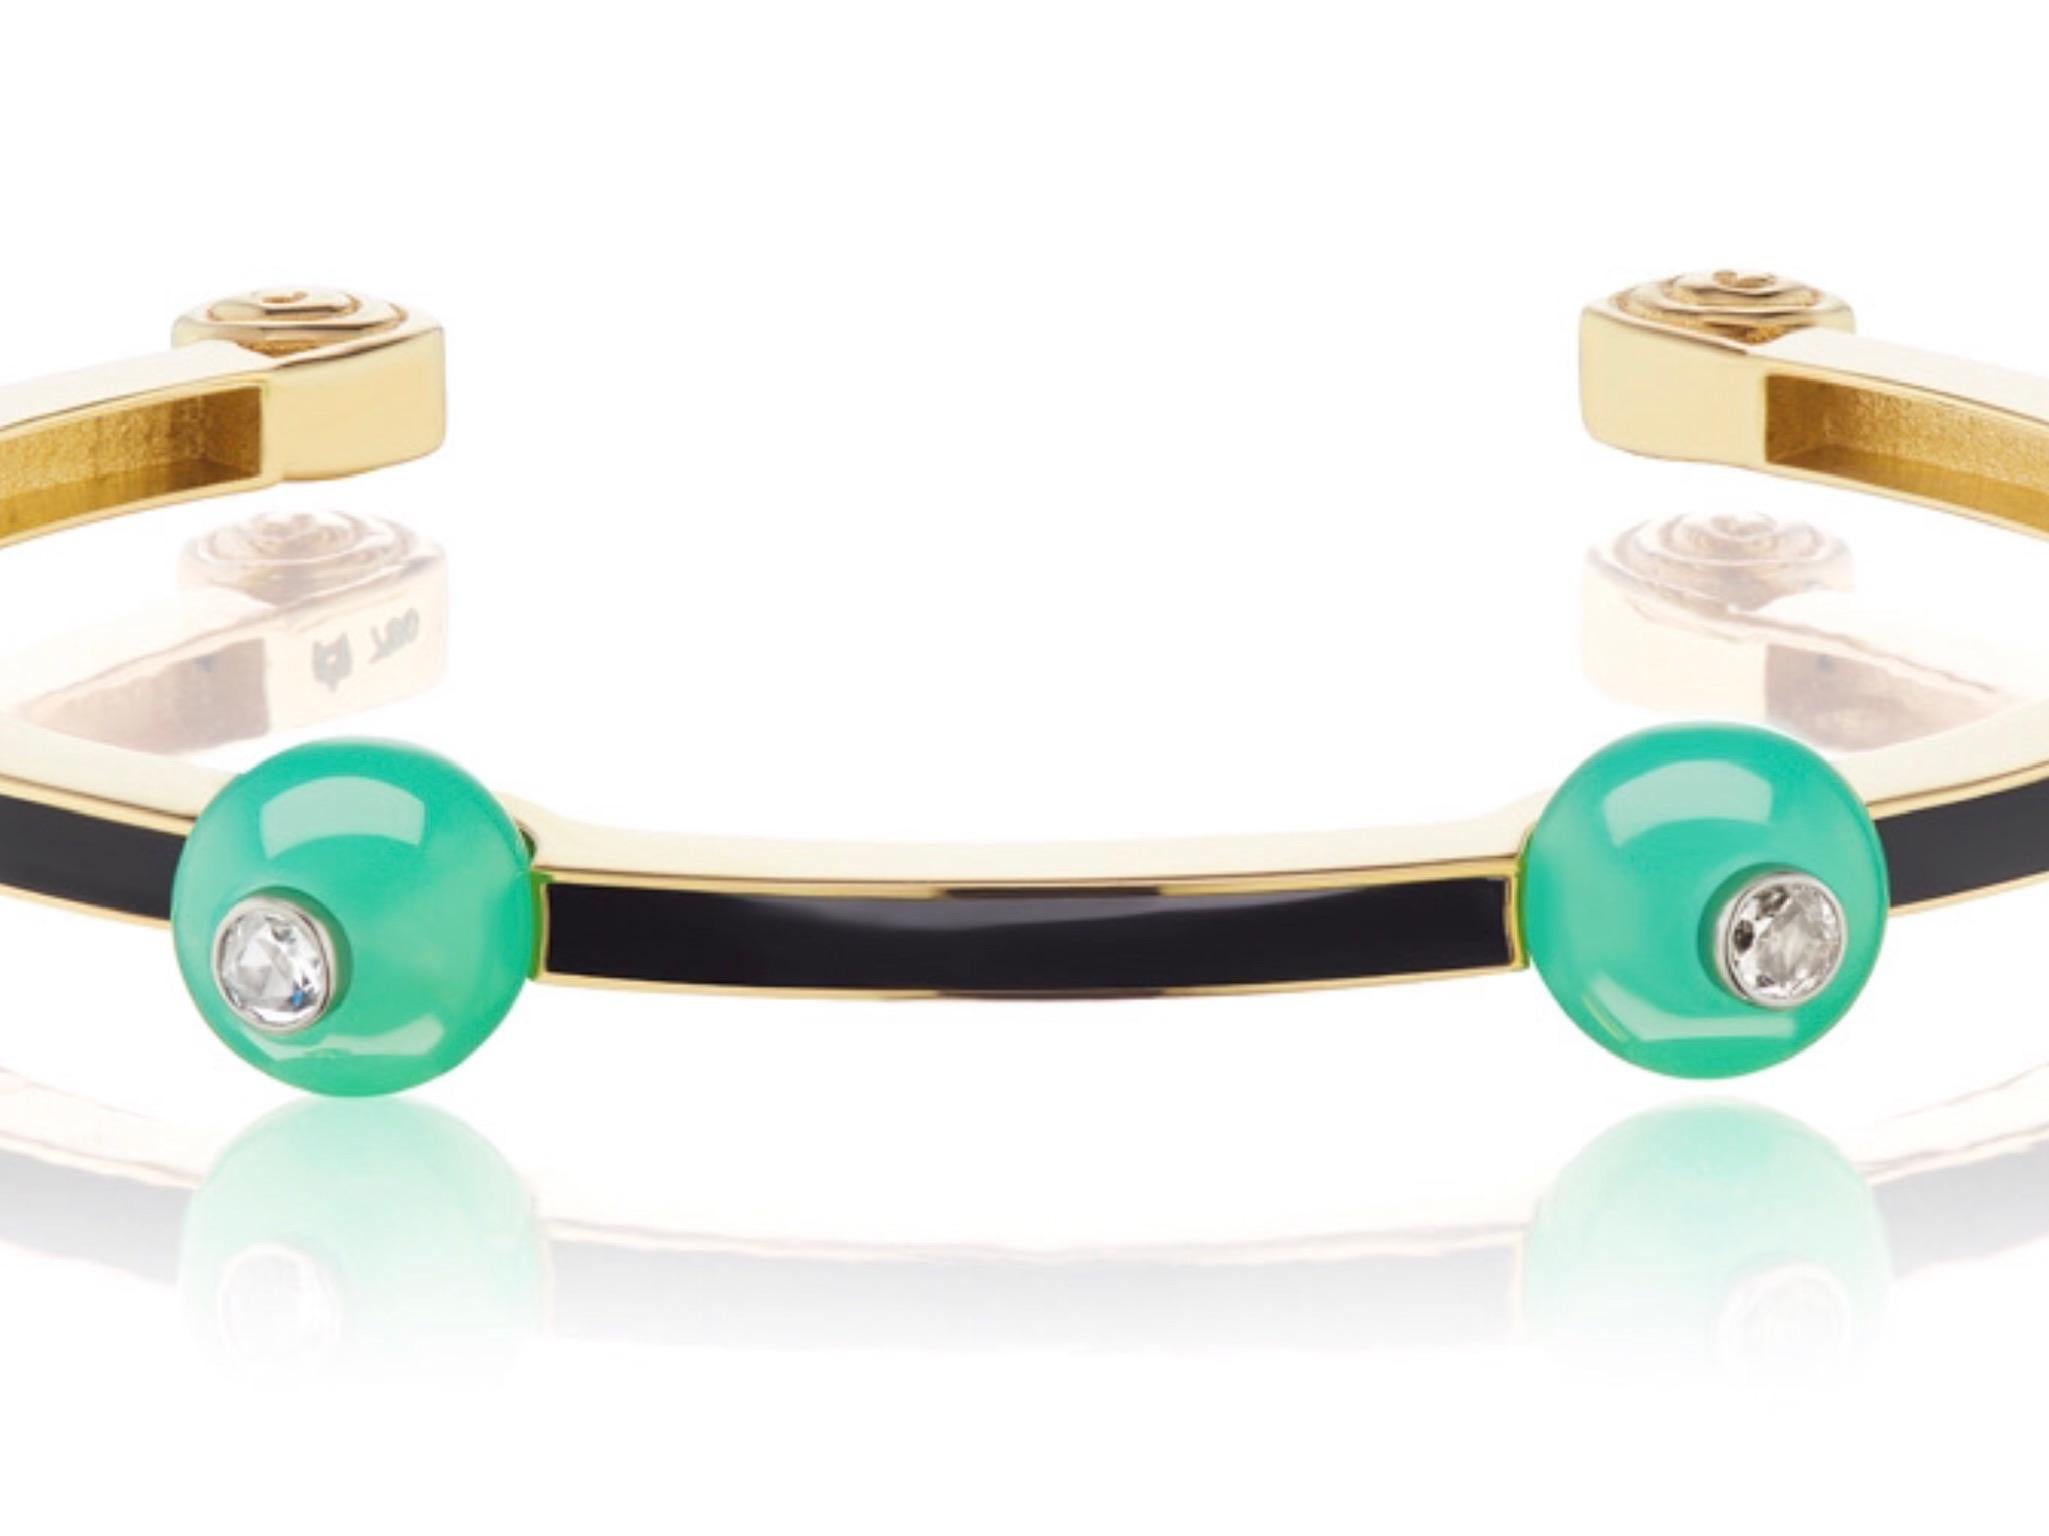 This new bracelet design by Andrew Glassford features 8.5mm Australian Chrysoprase spaced evenly between channels of black enamel in 18K Rose Gold. Australian Chrysoprase is considered one of the finest mine sources for the stone and the color is a